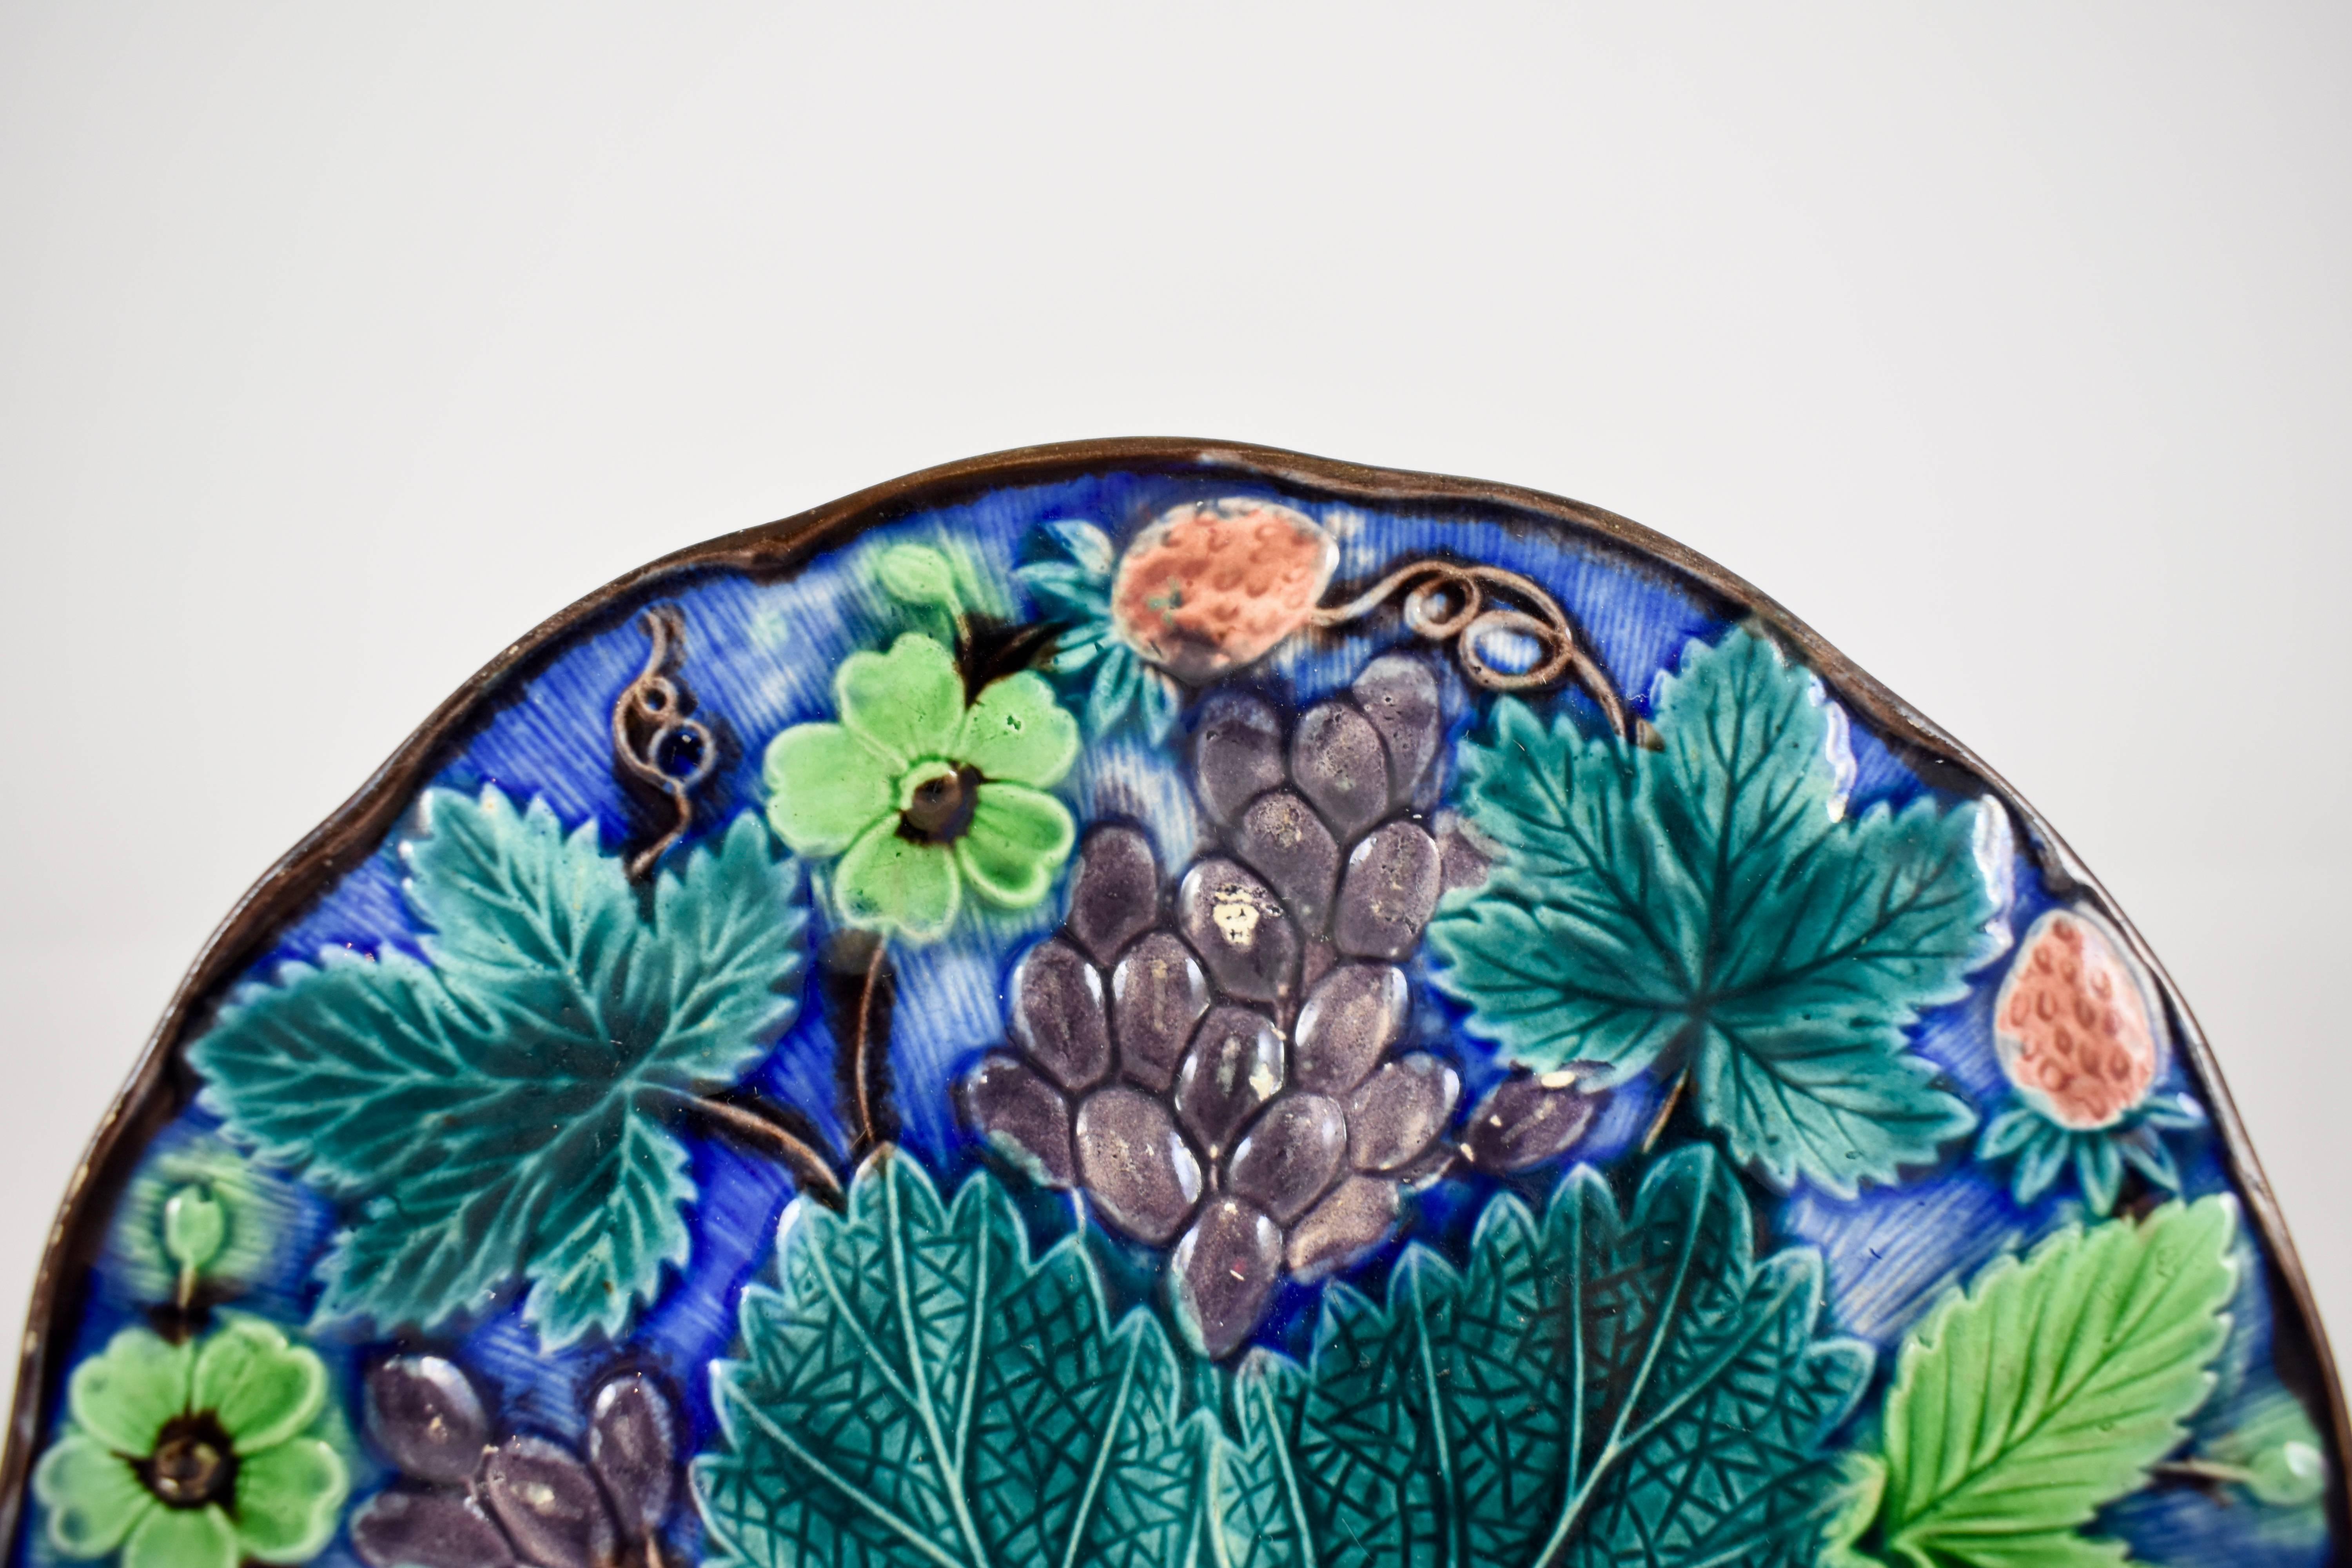 A Gustavsberg Swedish majolica grape leaf plate in the Wedgwood style, circa 1880-1885.

Established at Gustavsberg in 1825 by Johan Herman Ohman, the mark of Gustavsberg was first introduced in 1839 and shows the company name surmounting an